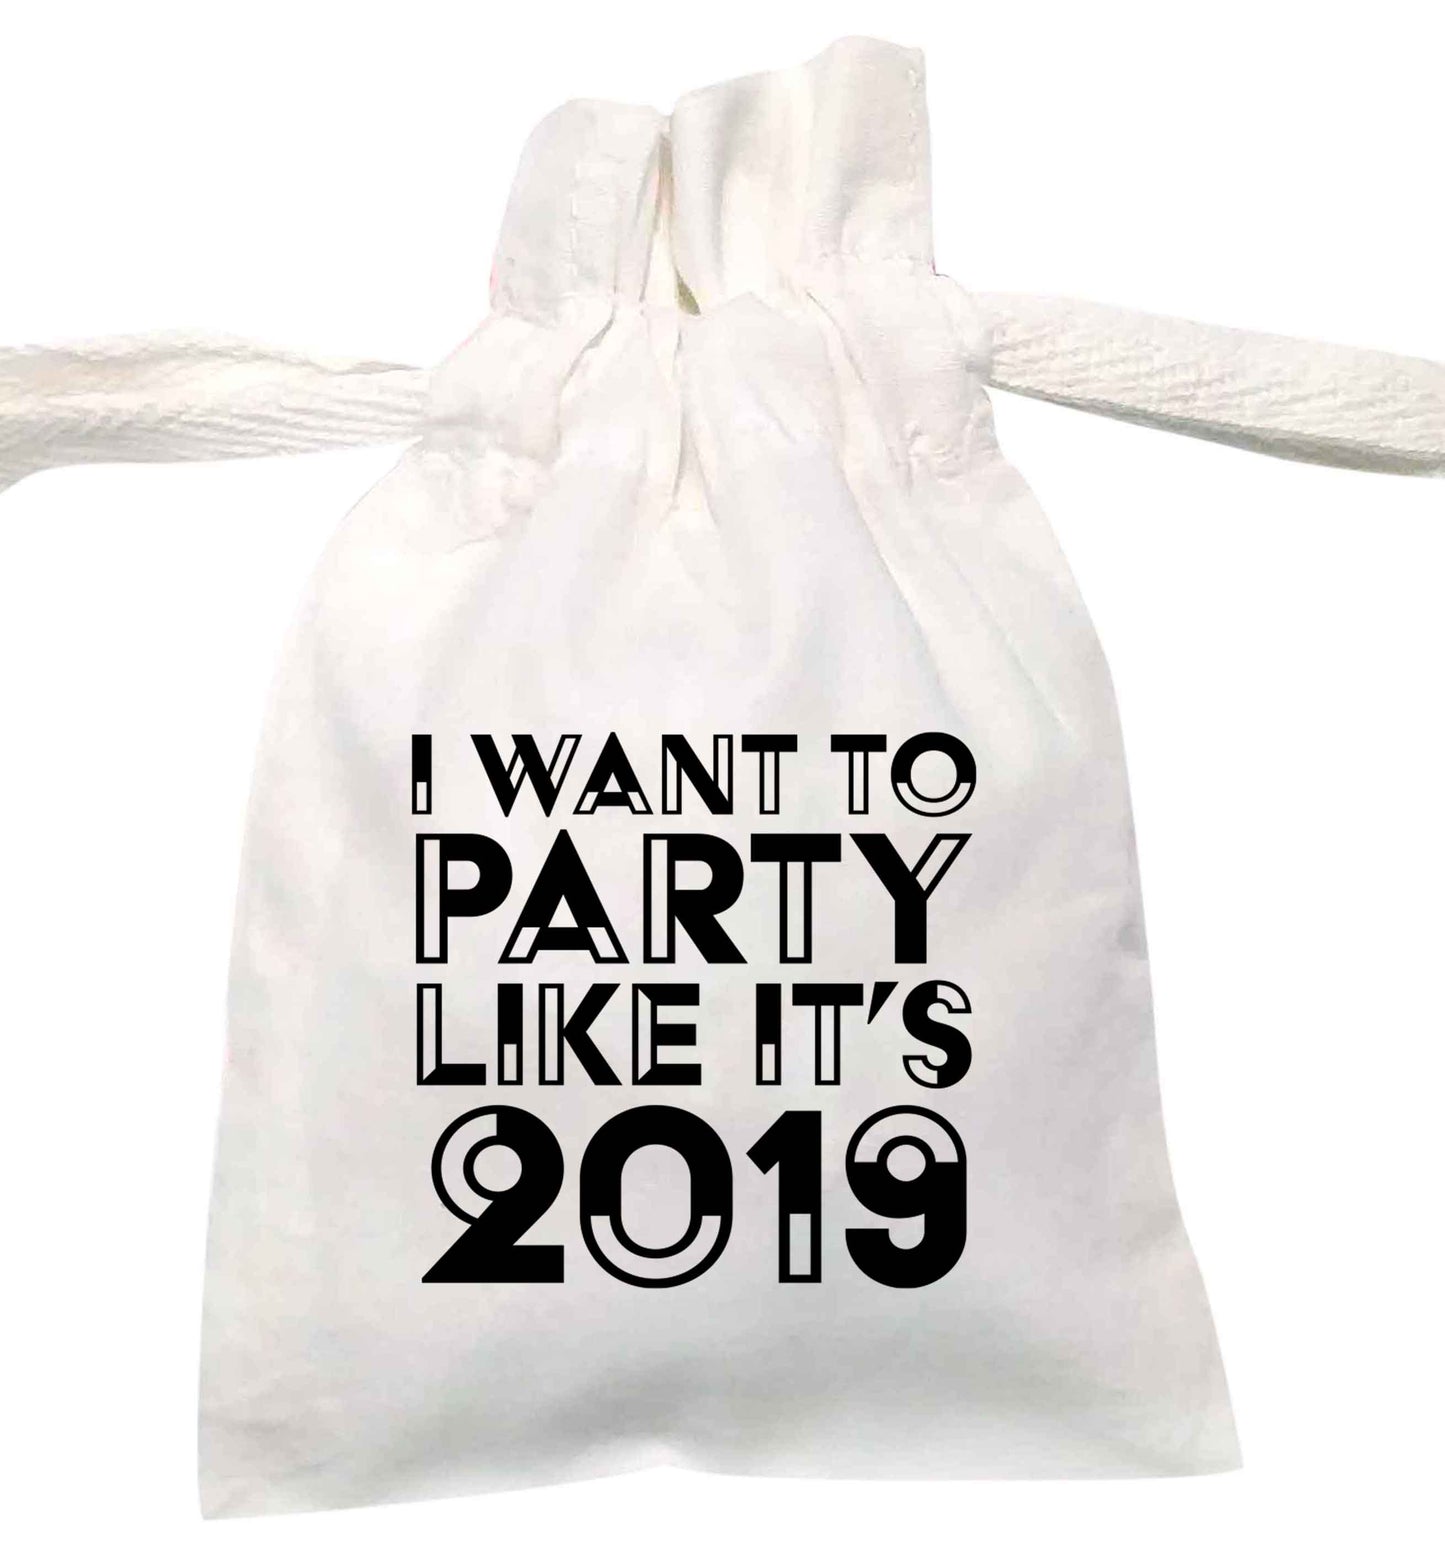 I want to party like it's 2019 | XS - L | Pouch / Drawstring bag / Sack | Organic Cotton | Bulk discounts available!